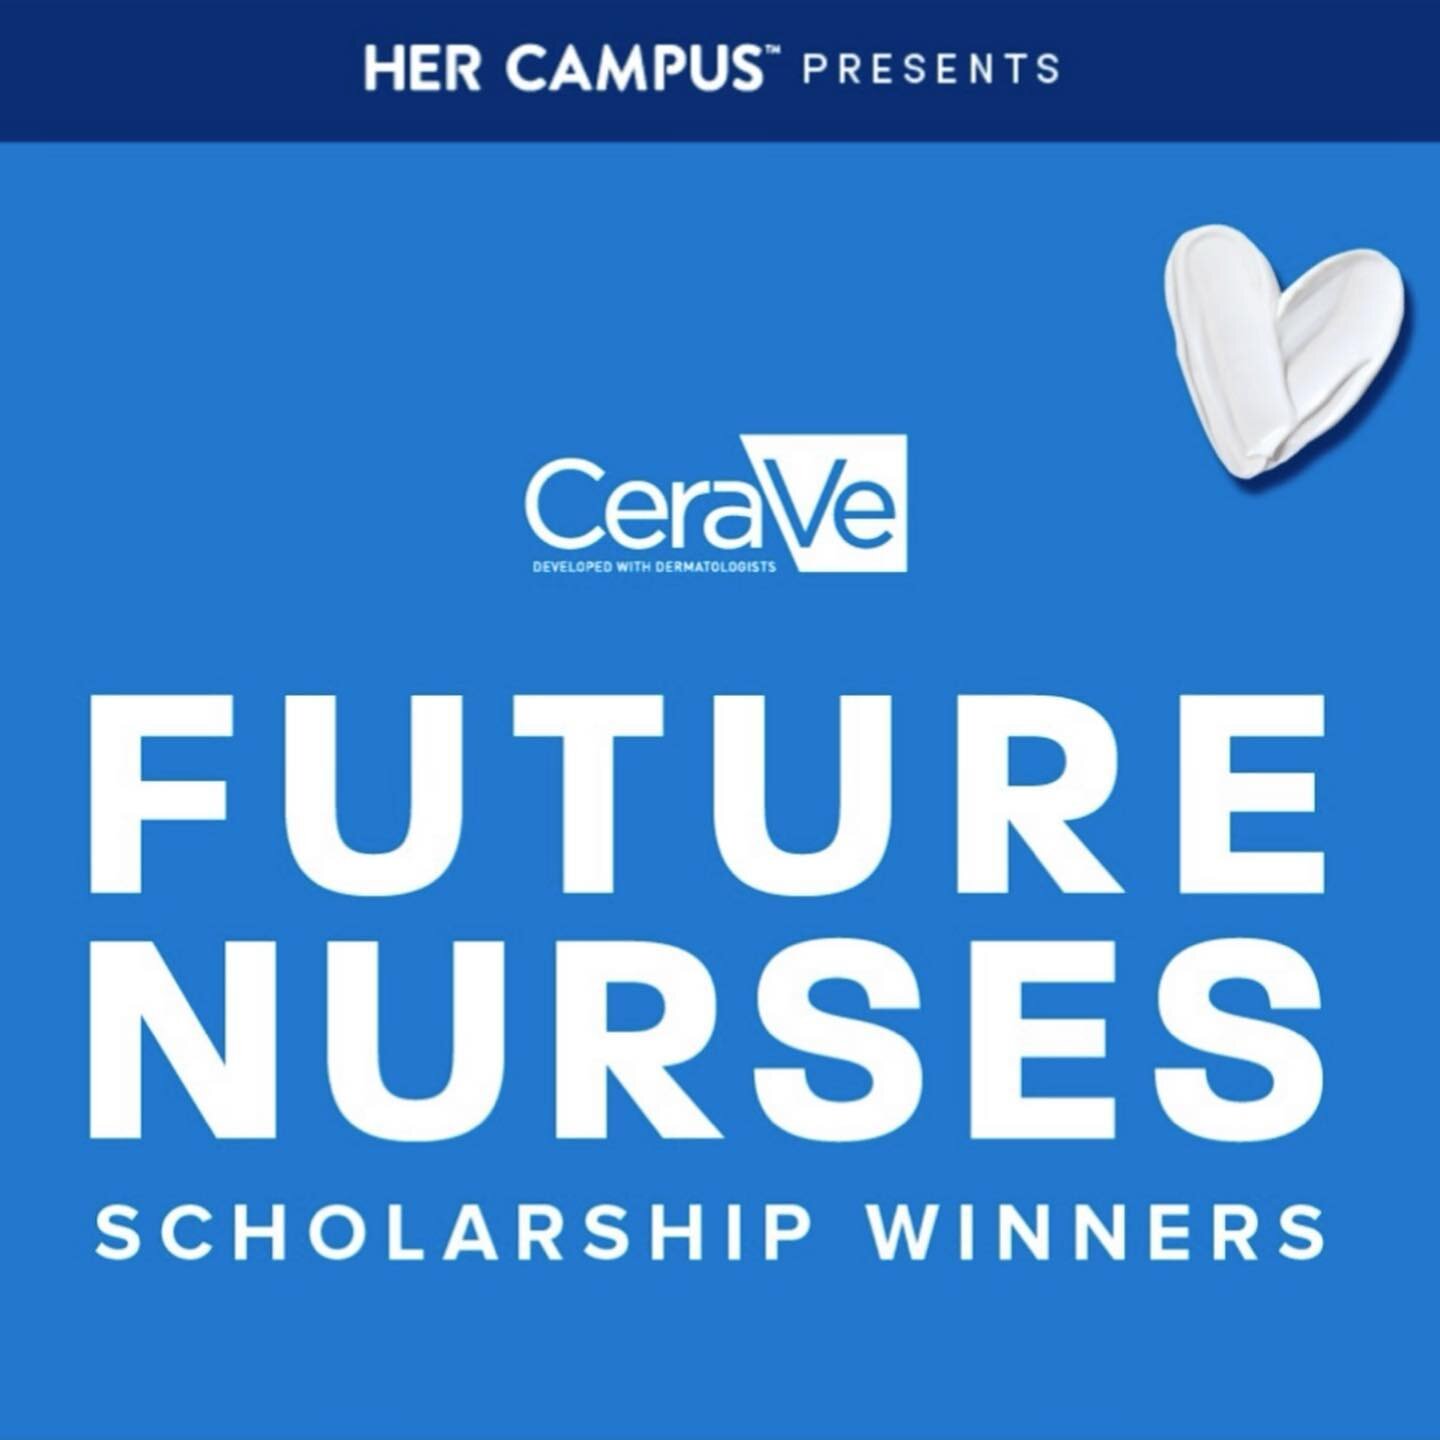 @hercampus teamed up with @cerave to support future nurses with $50K in grants to scholarship winners. We ❤️ our nurses and healthcare workers. #nationalnursesday